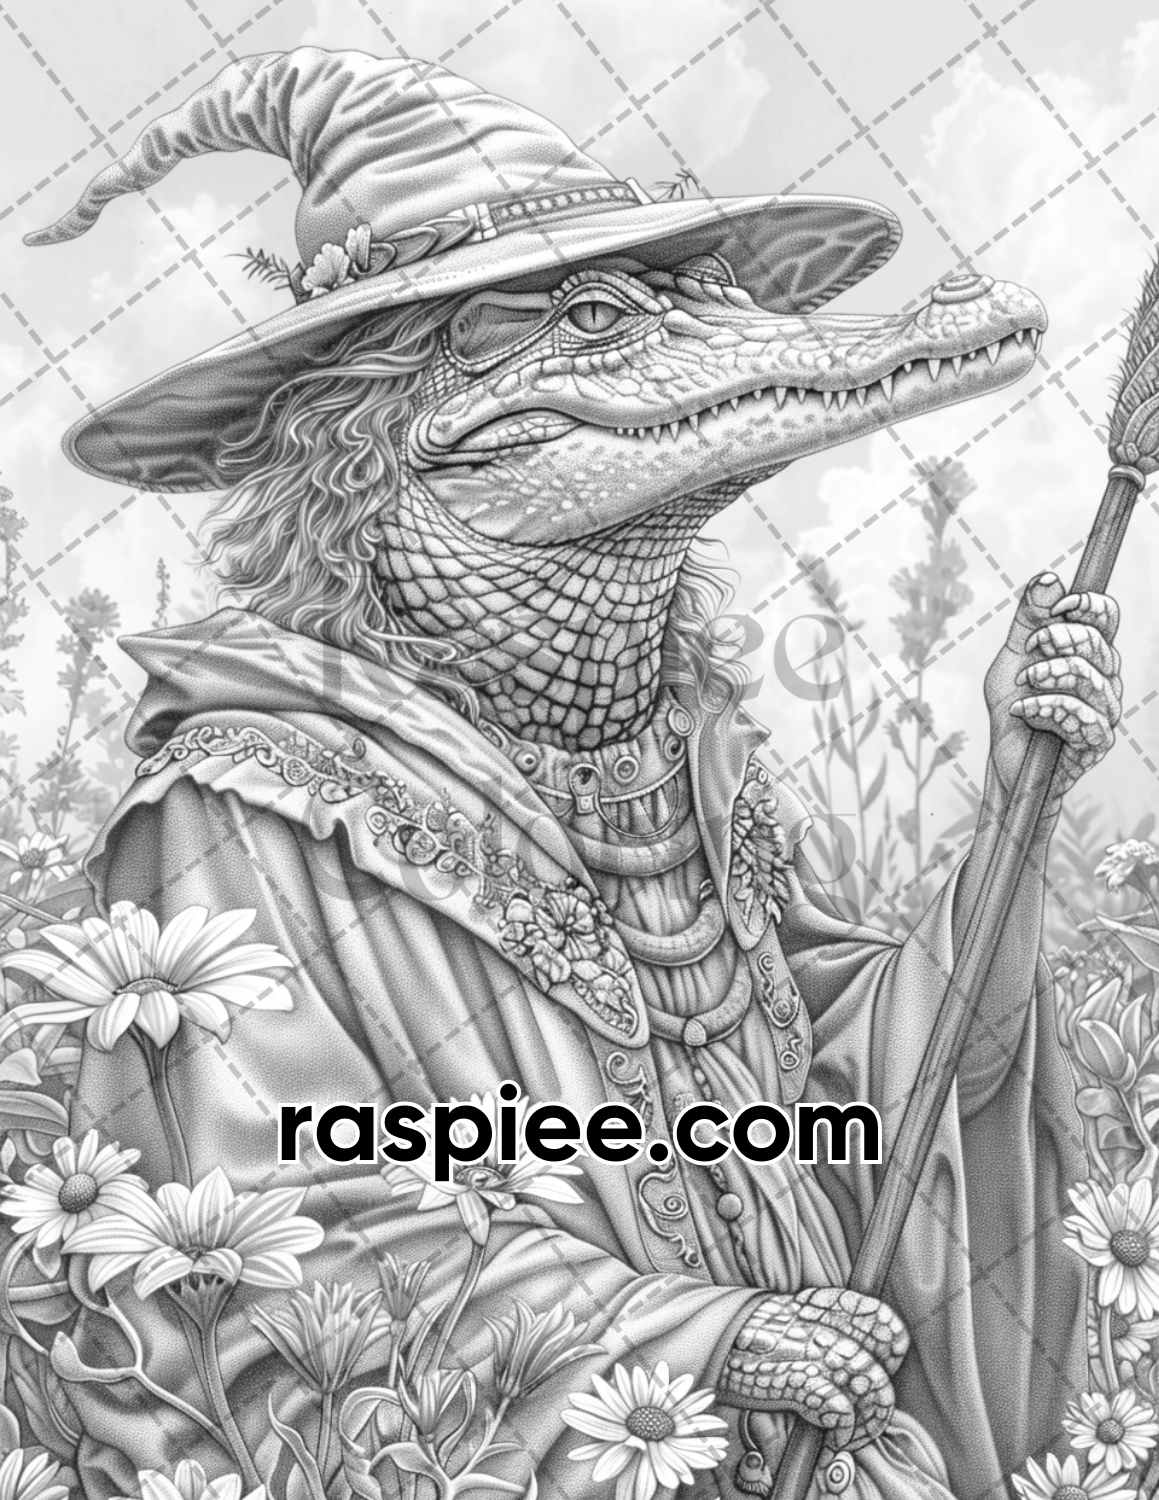 adult coloring pages, adult coloring sheets, adult coloring book pdf, adult coloring book printable, grayscale coloring pages, grayscale coloring books, grayscale illustration, wizard animals adult coloring pages, wizard animals adult coloring book